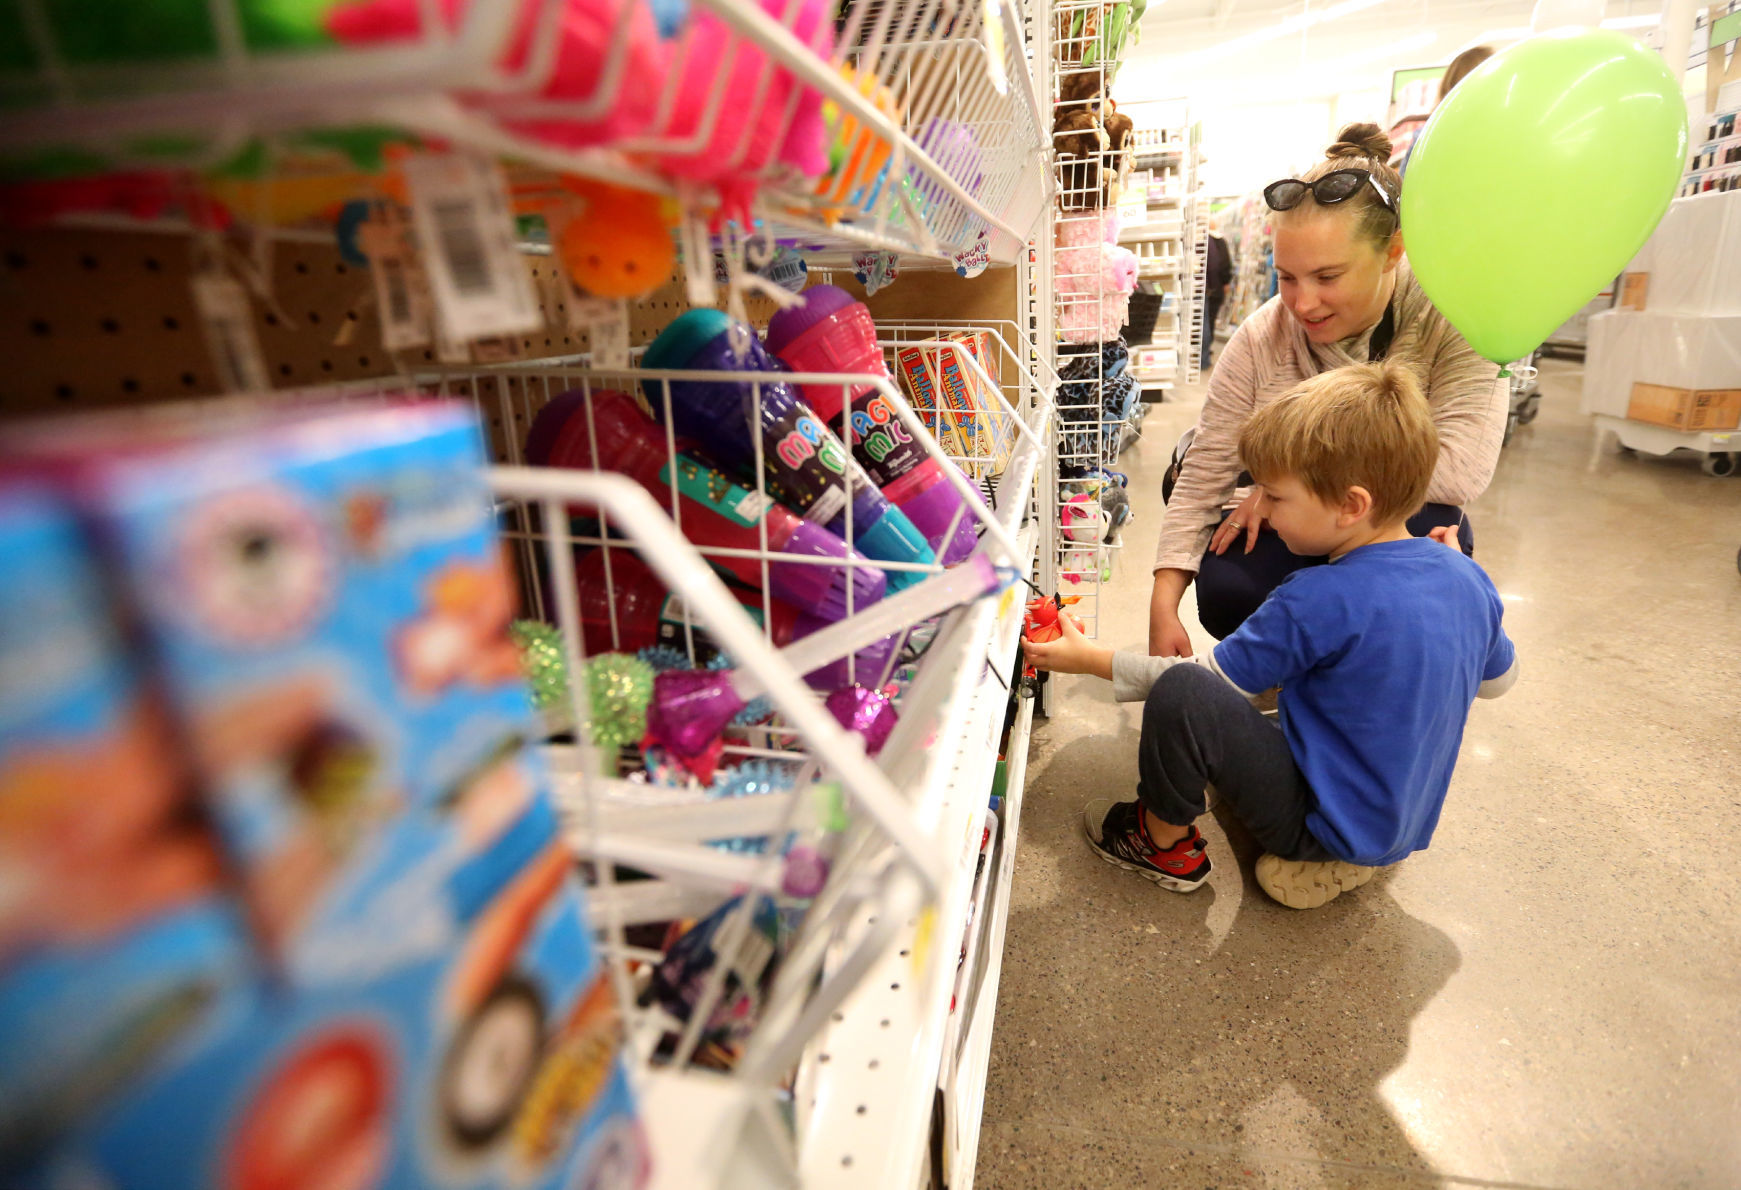 Melissa Essner and her son, Tyler Essner, 4, both of Peosta, Iowa, shop at JoAnn in Dubuque on Friday, Oct. 25, 2019. PHOTO CREDIT: JESSICA REILLY